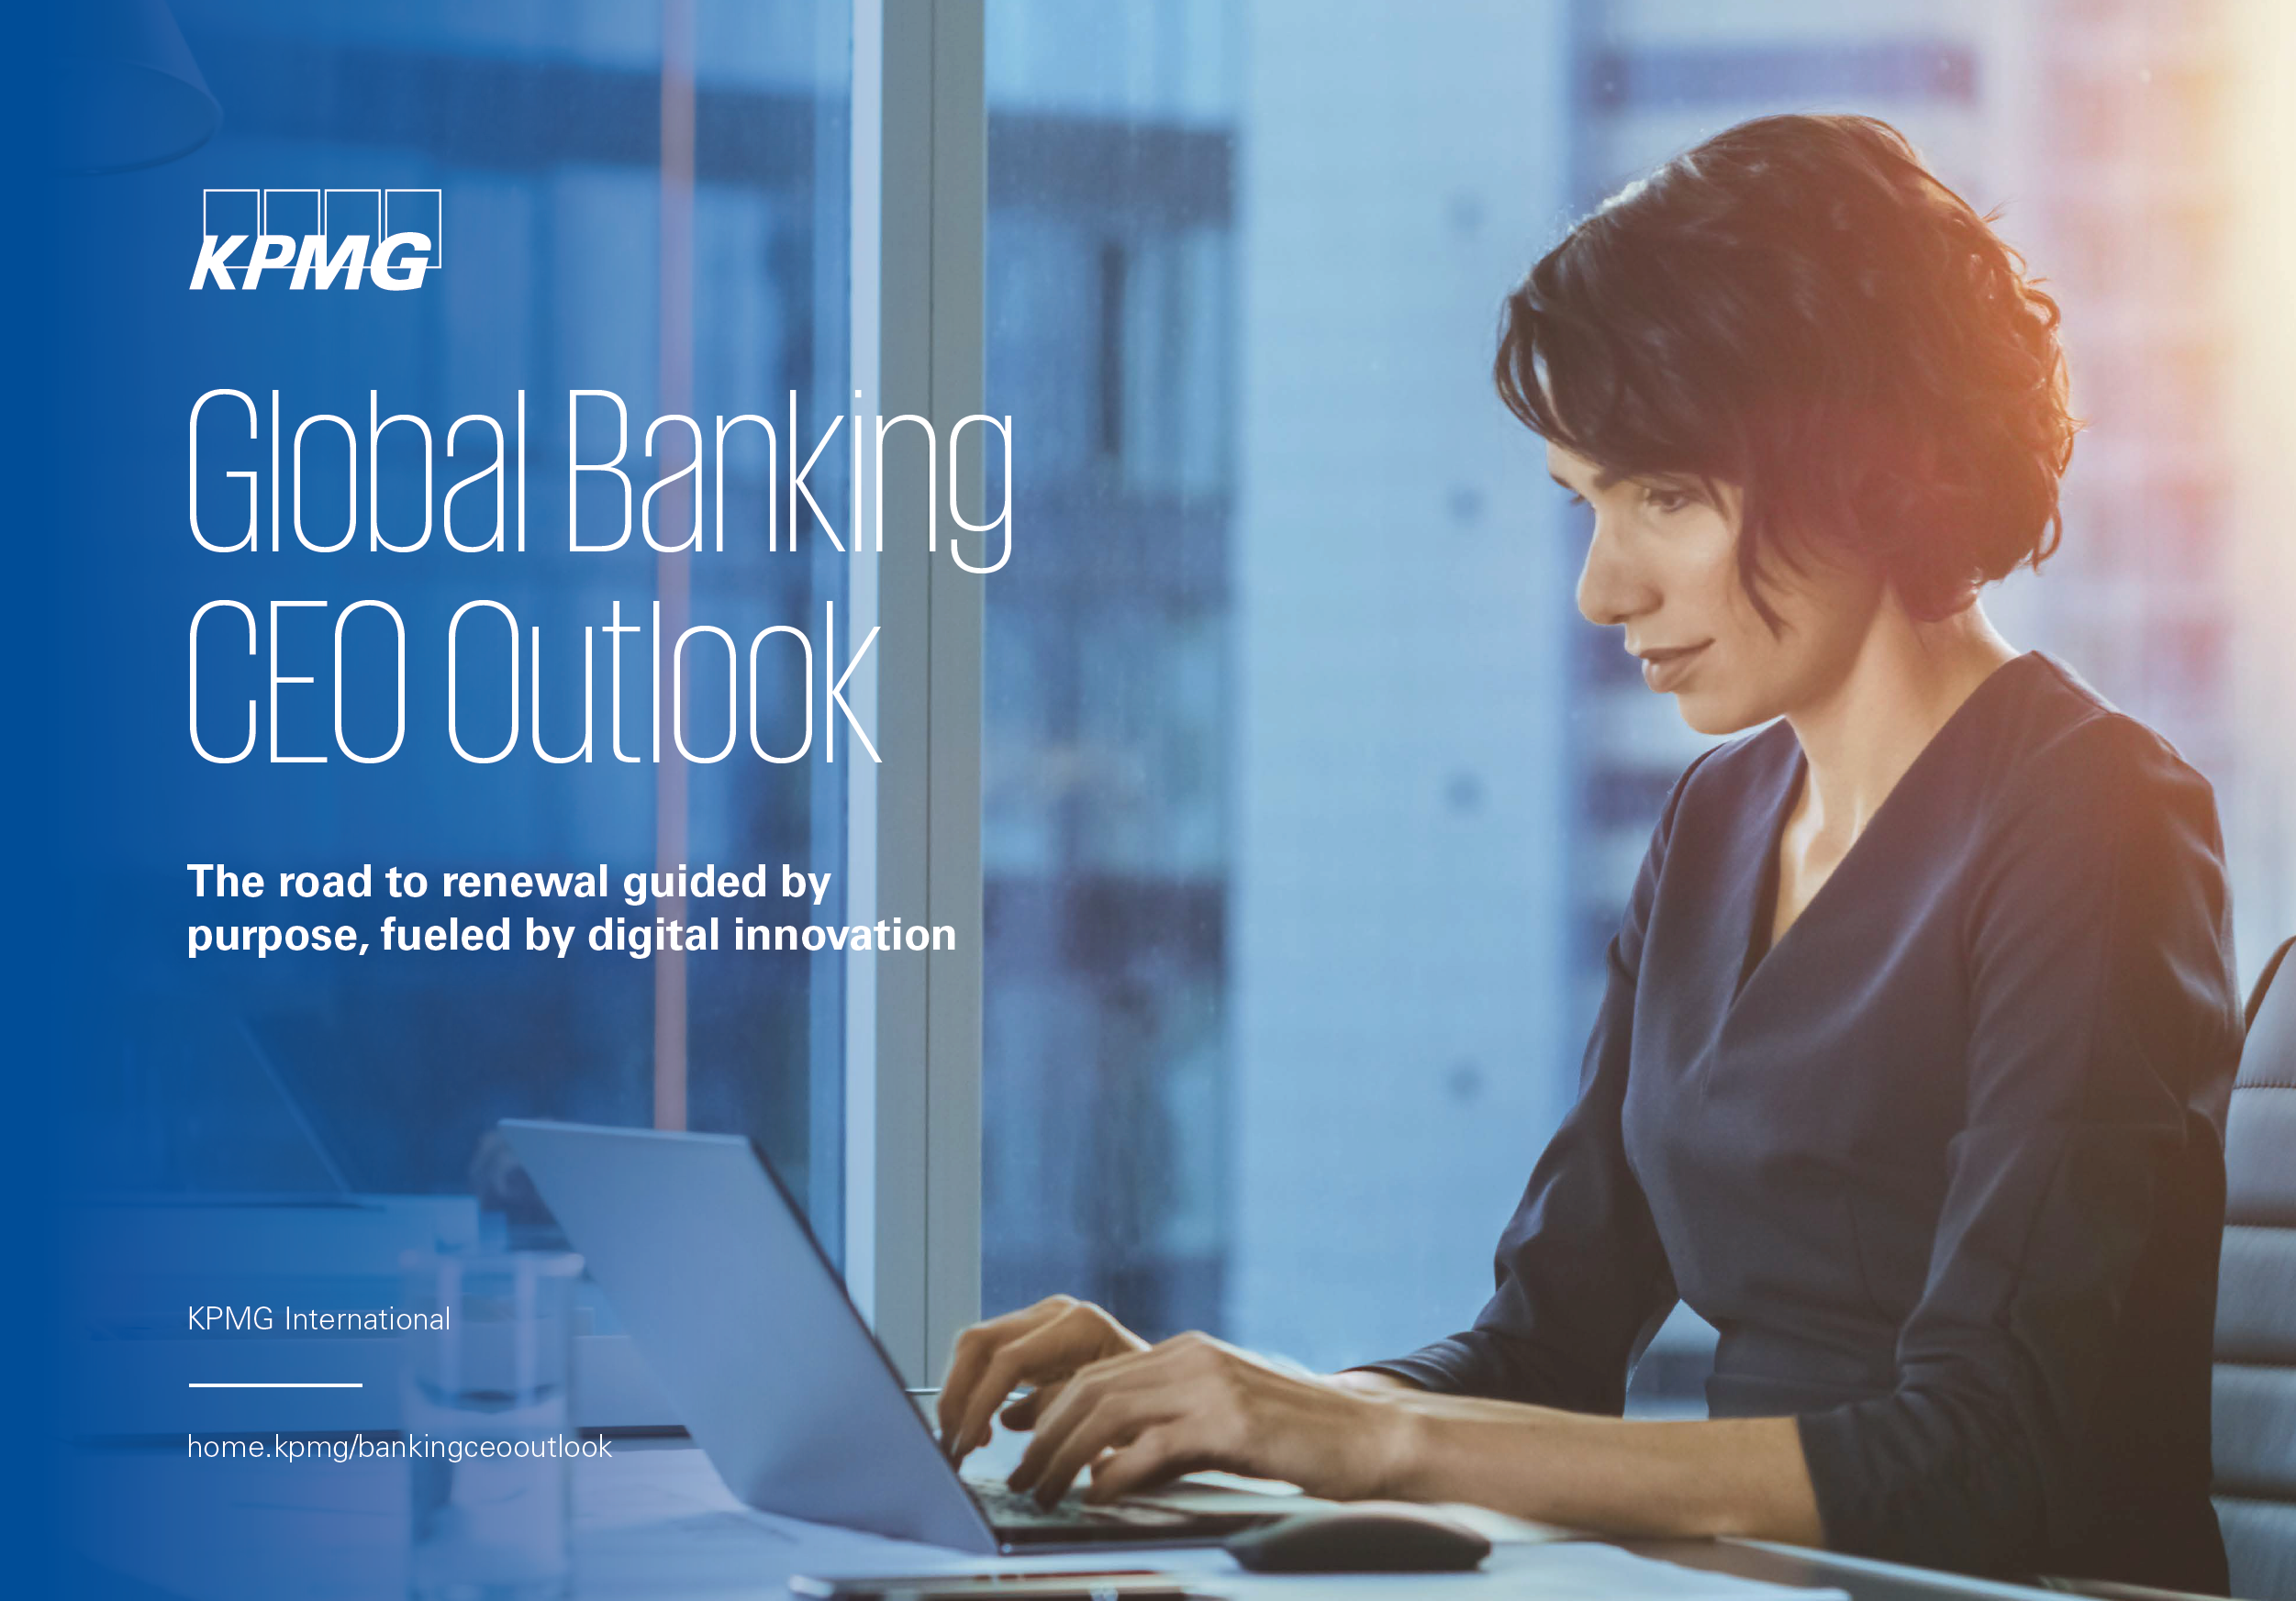 KPMG Global Banking CEO Outlook